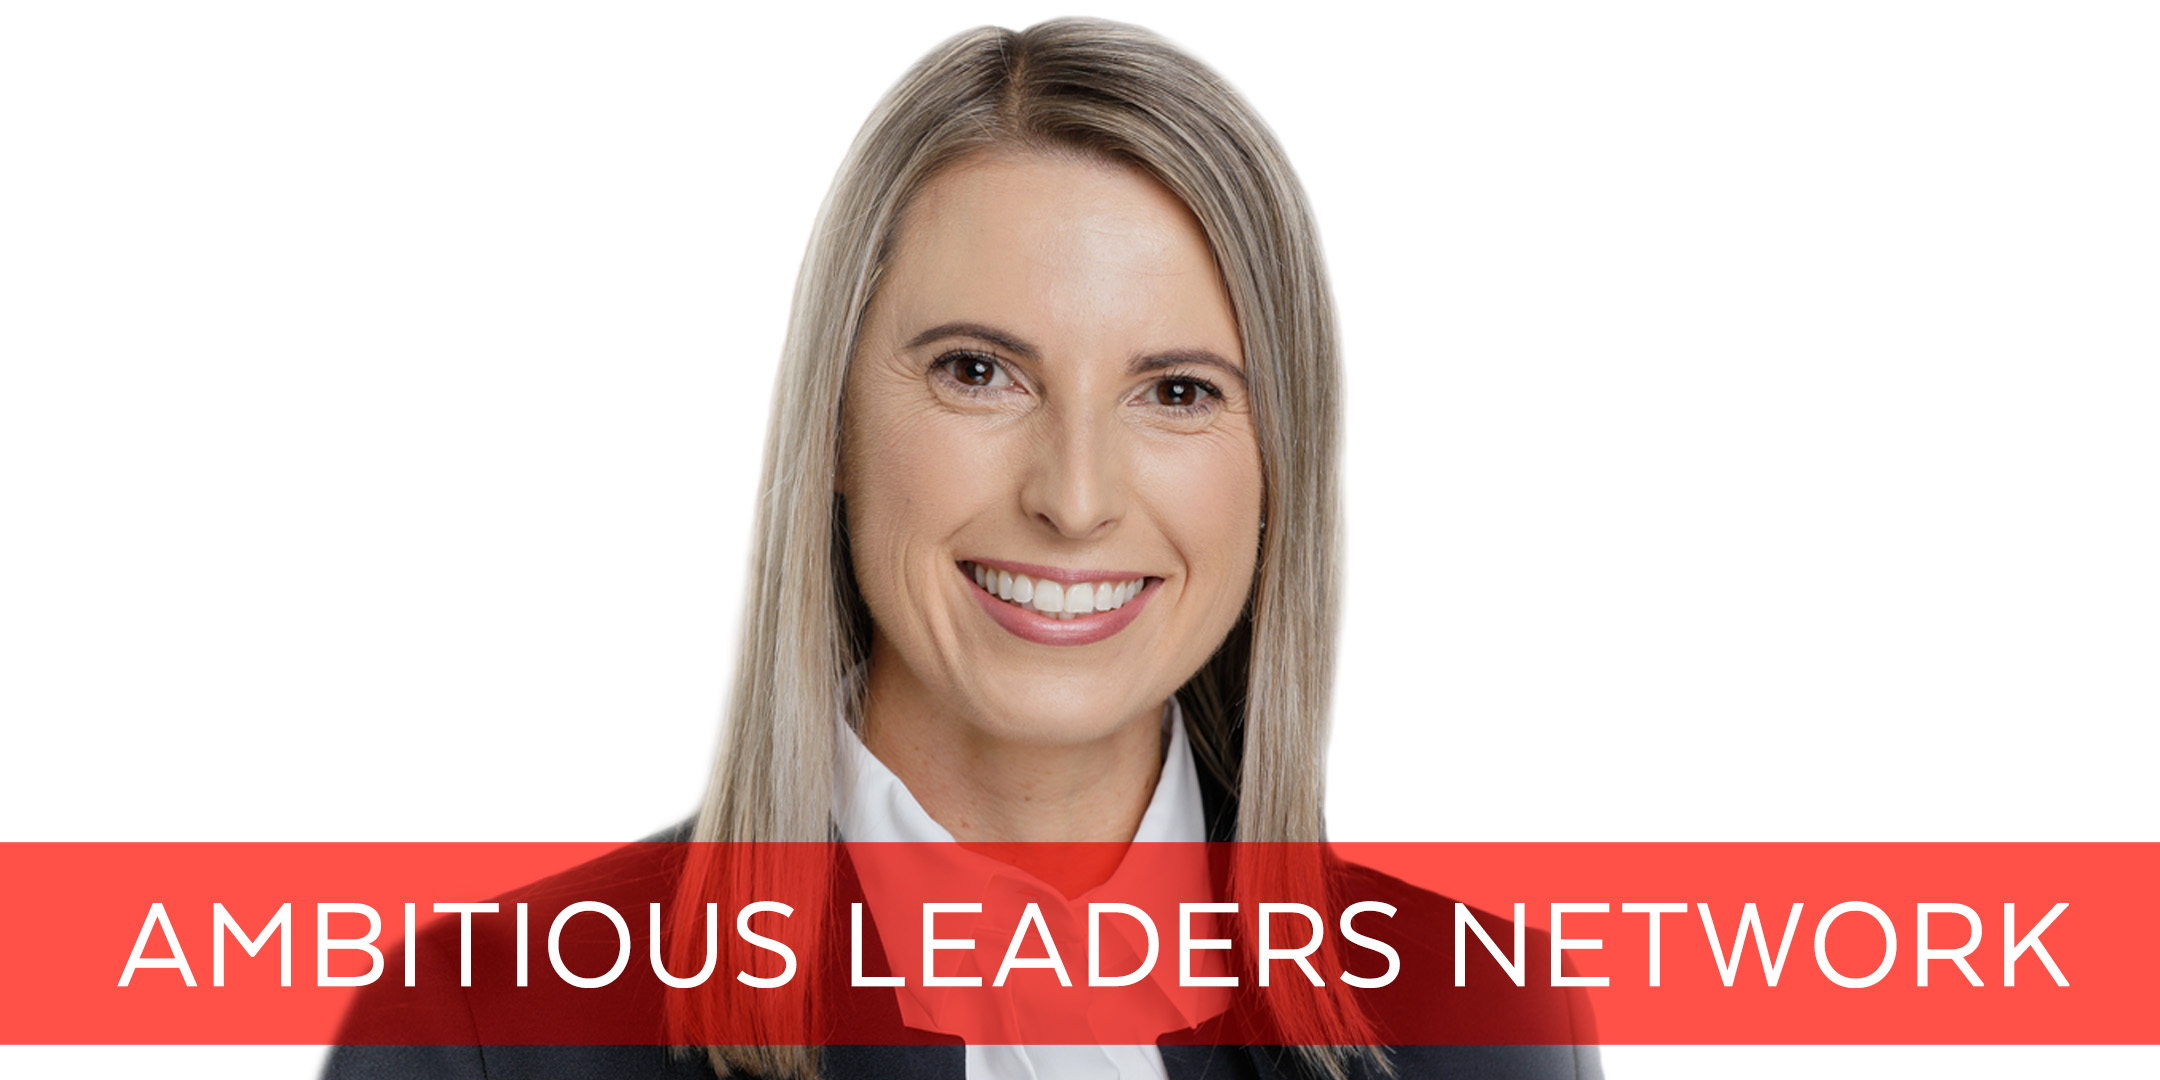 Ambitious Leaders Network - Lara Woodley